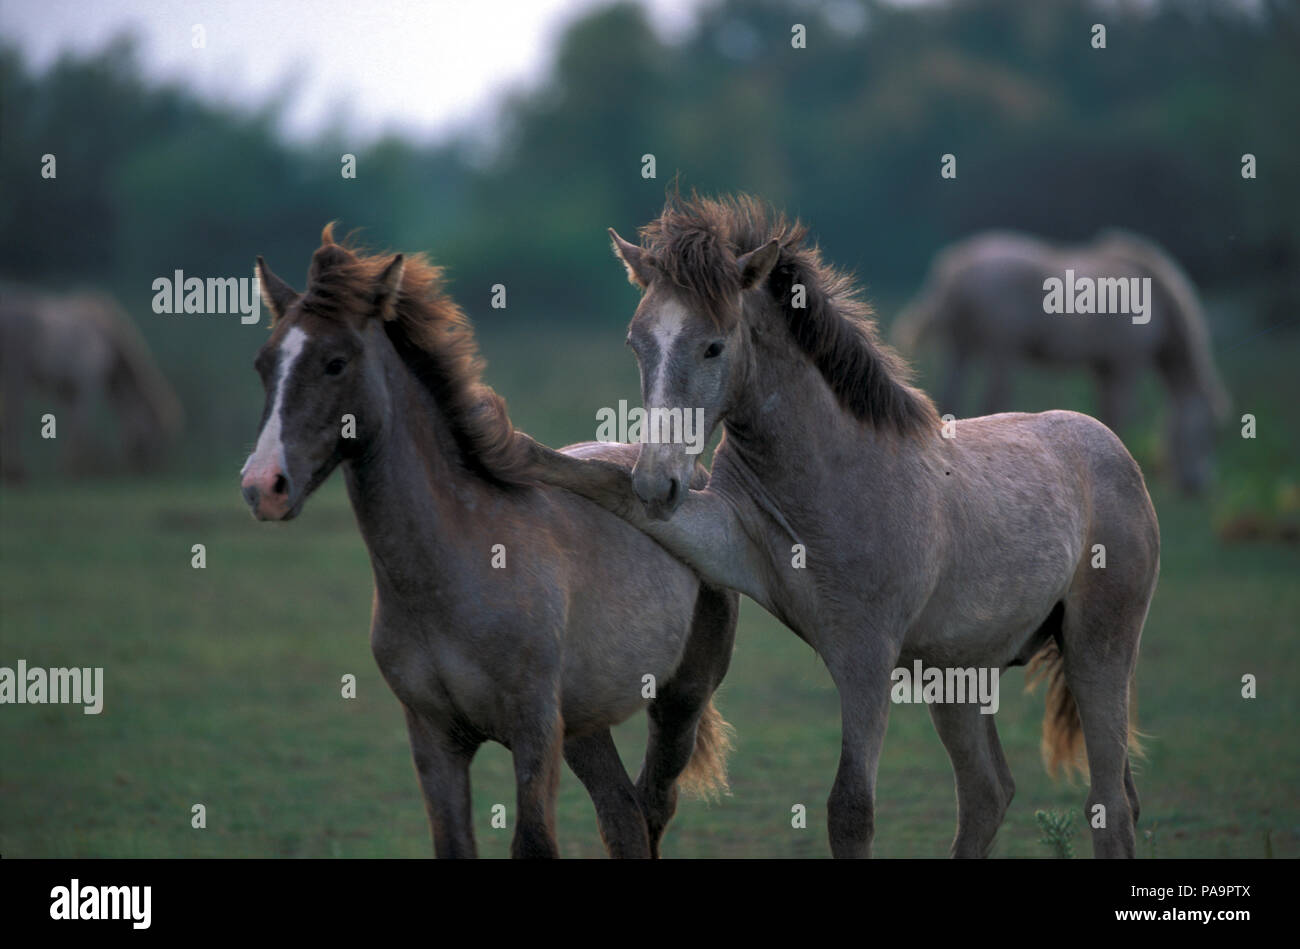 Wild Horse of Camargue - Game - Foals - Cheval Camargue - Jeux - Equus caballus - Southern France Stock Photo